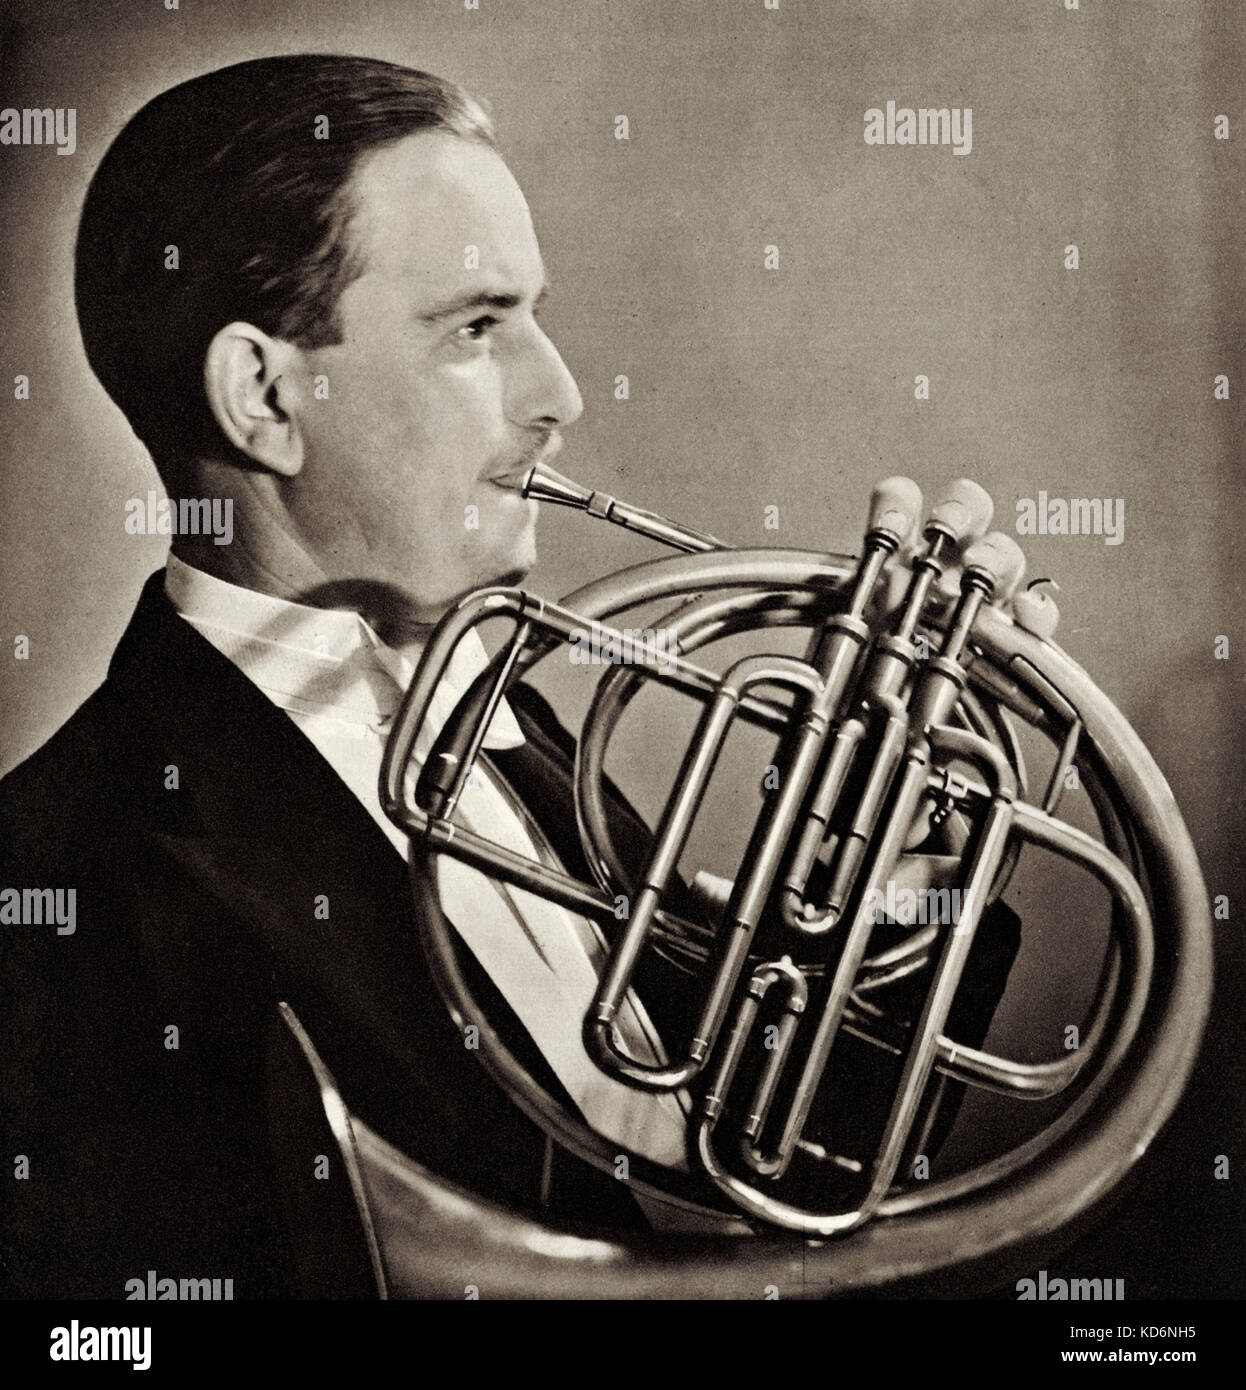 French horn - played by Aubrey Brain. British horn player, 1893 - 1955. Father of Dennis Brain. Stock Photo